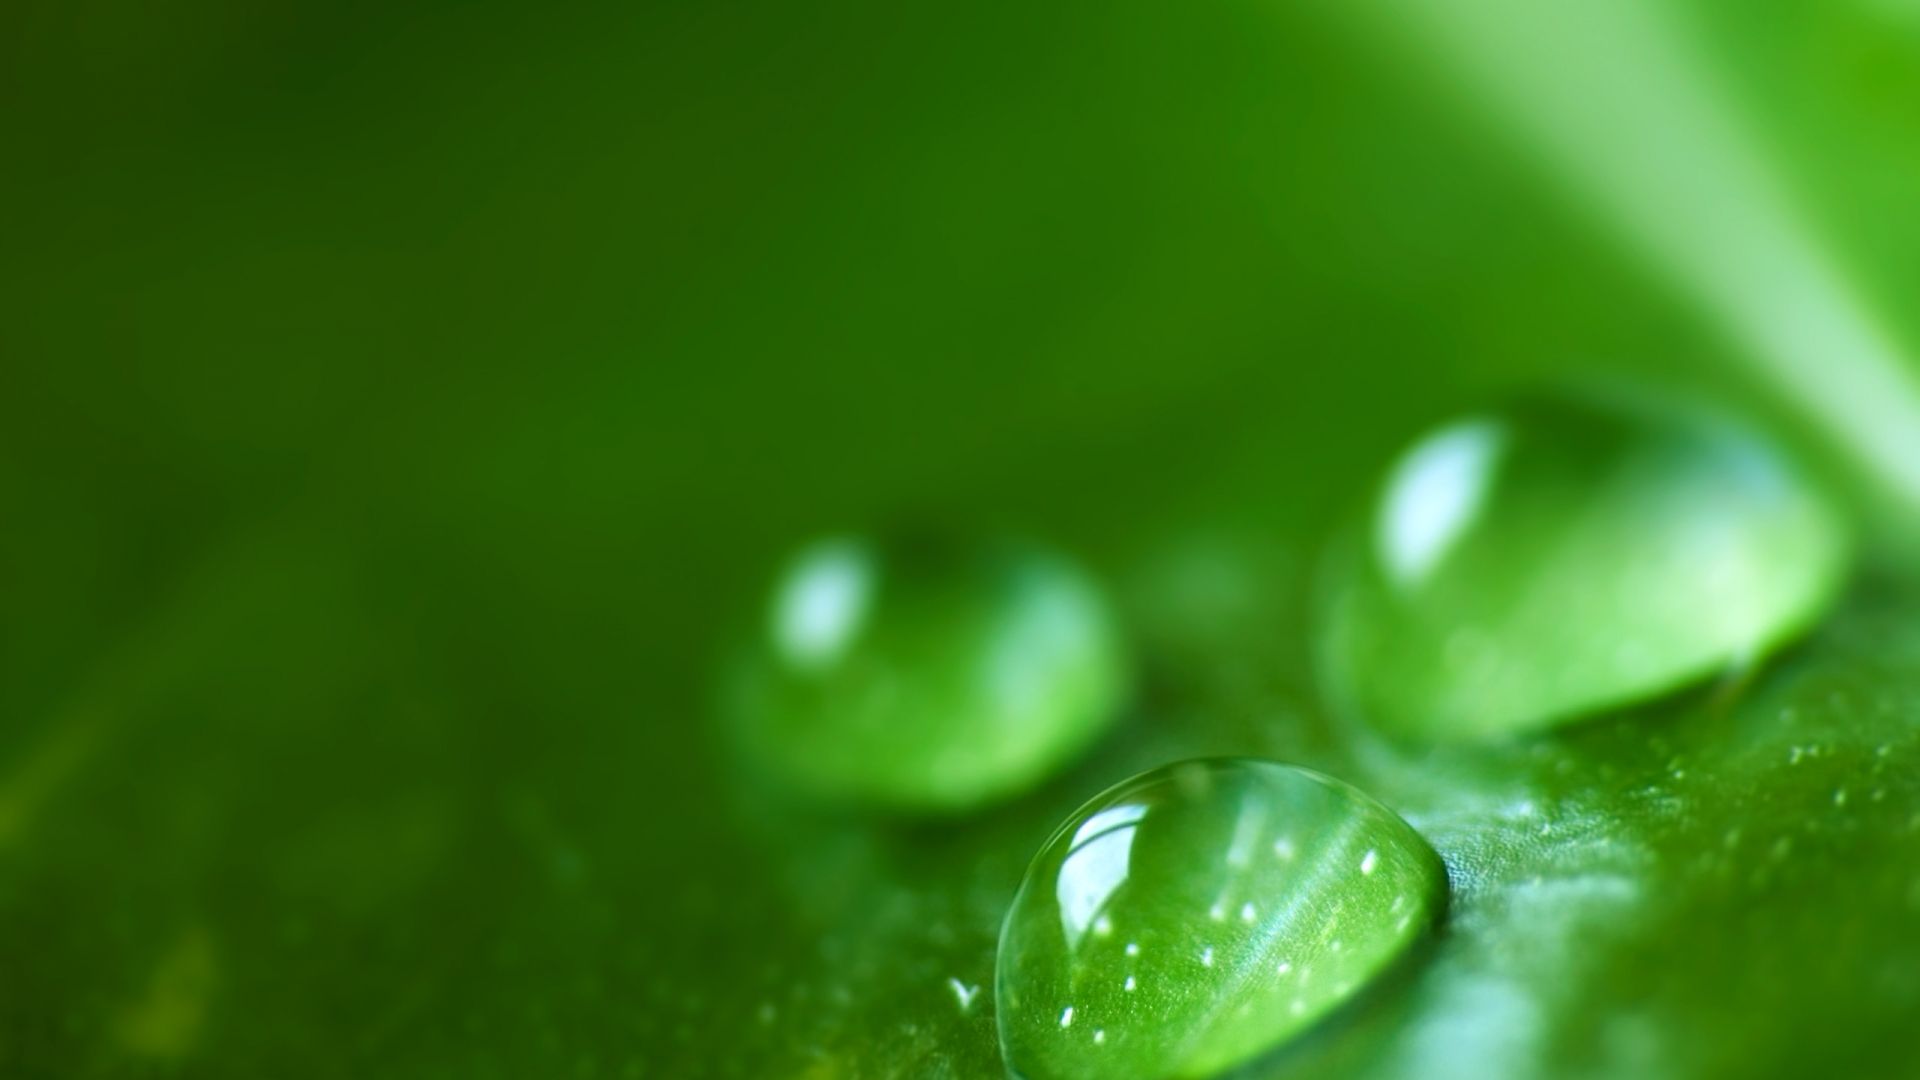 Super High Detail Water Droplets - HD Wallpapers